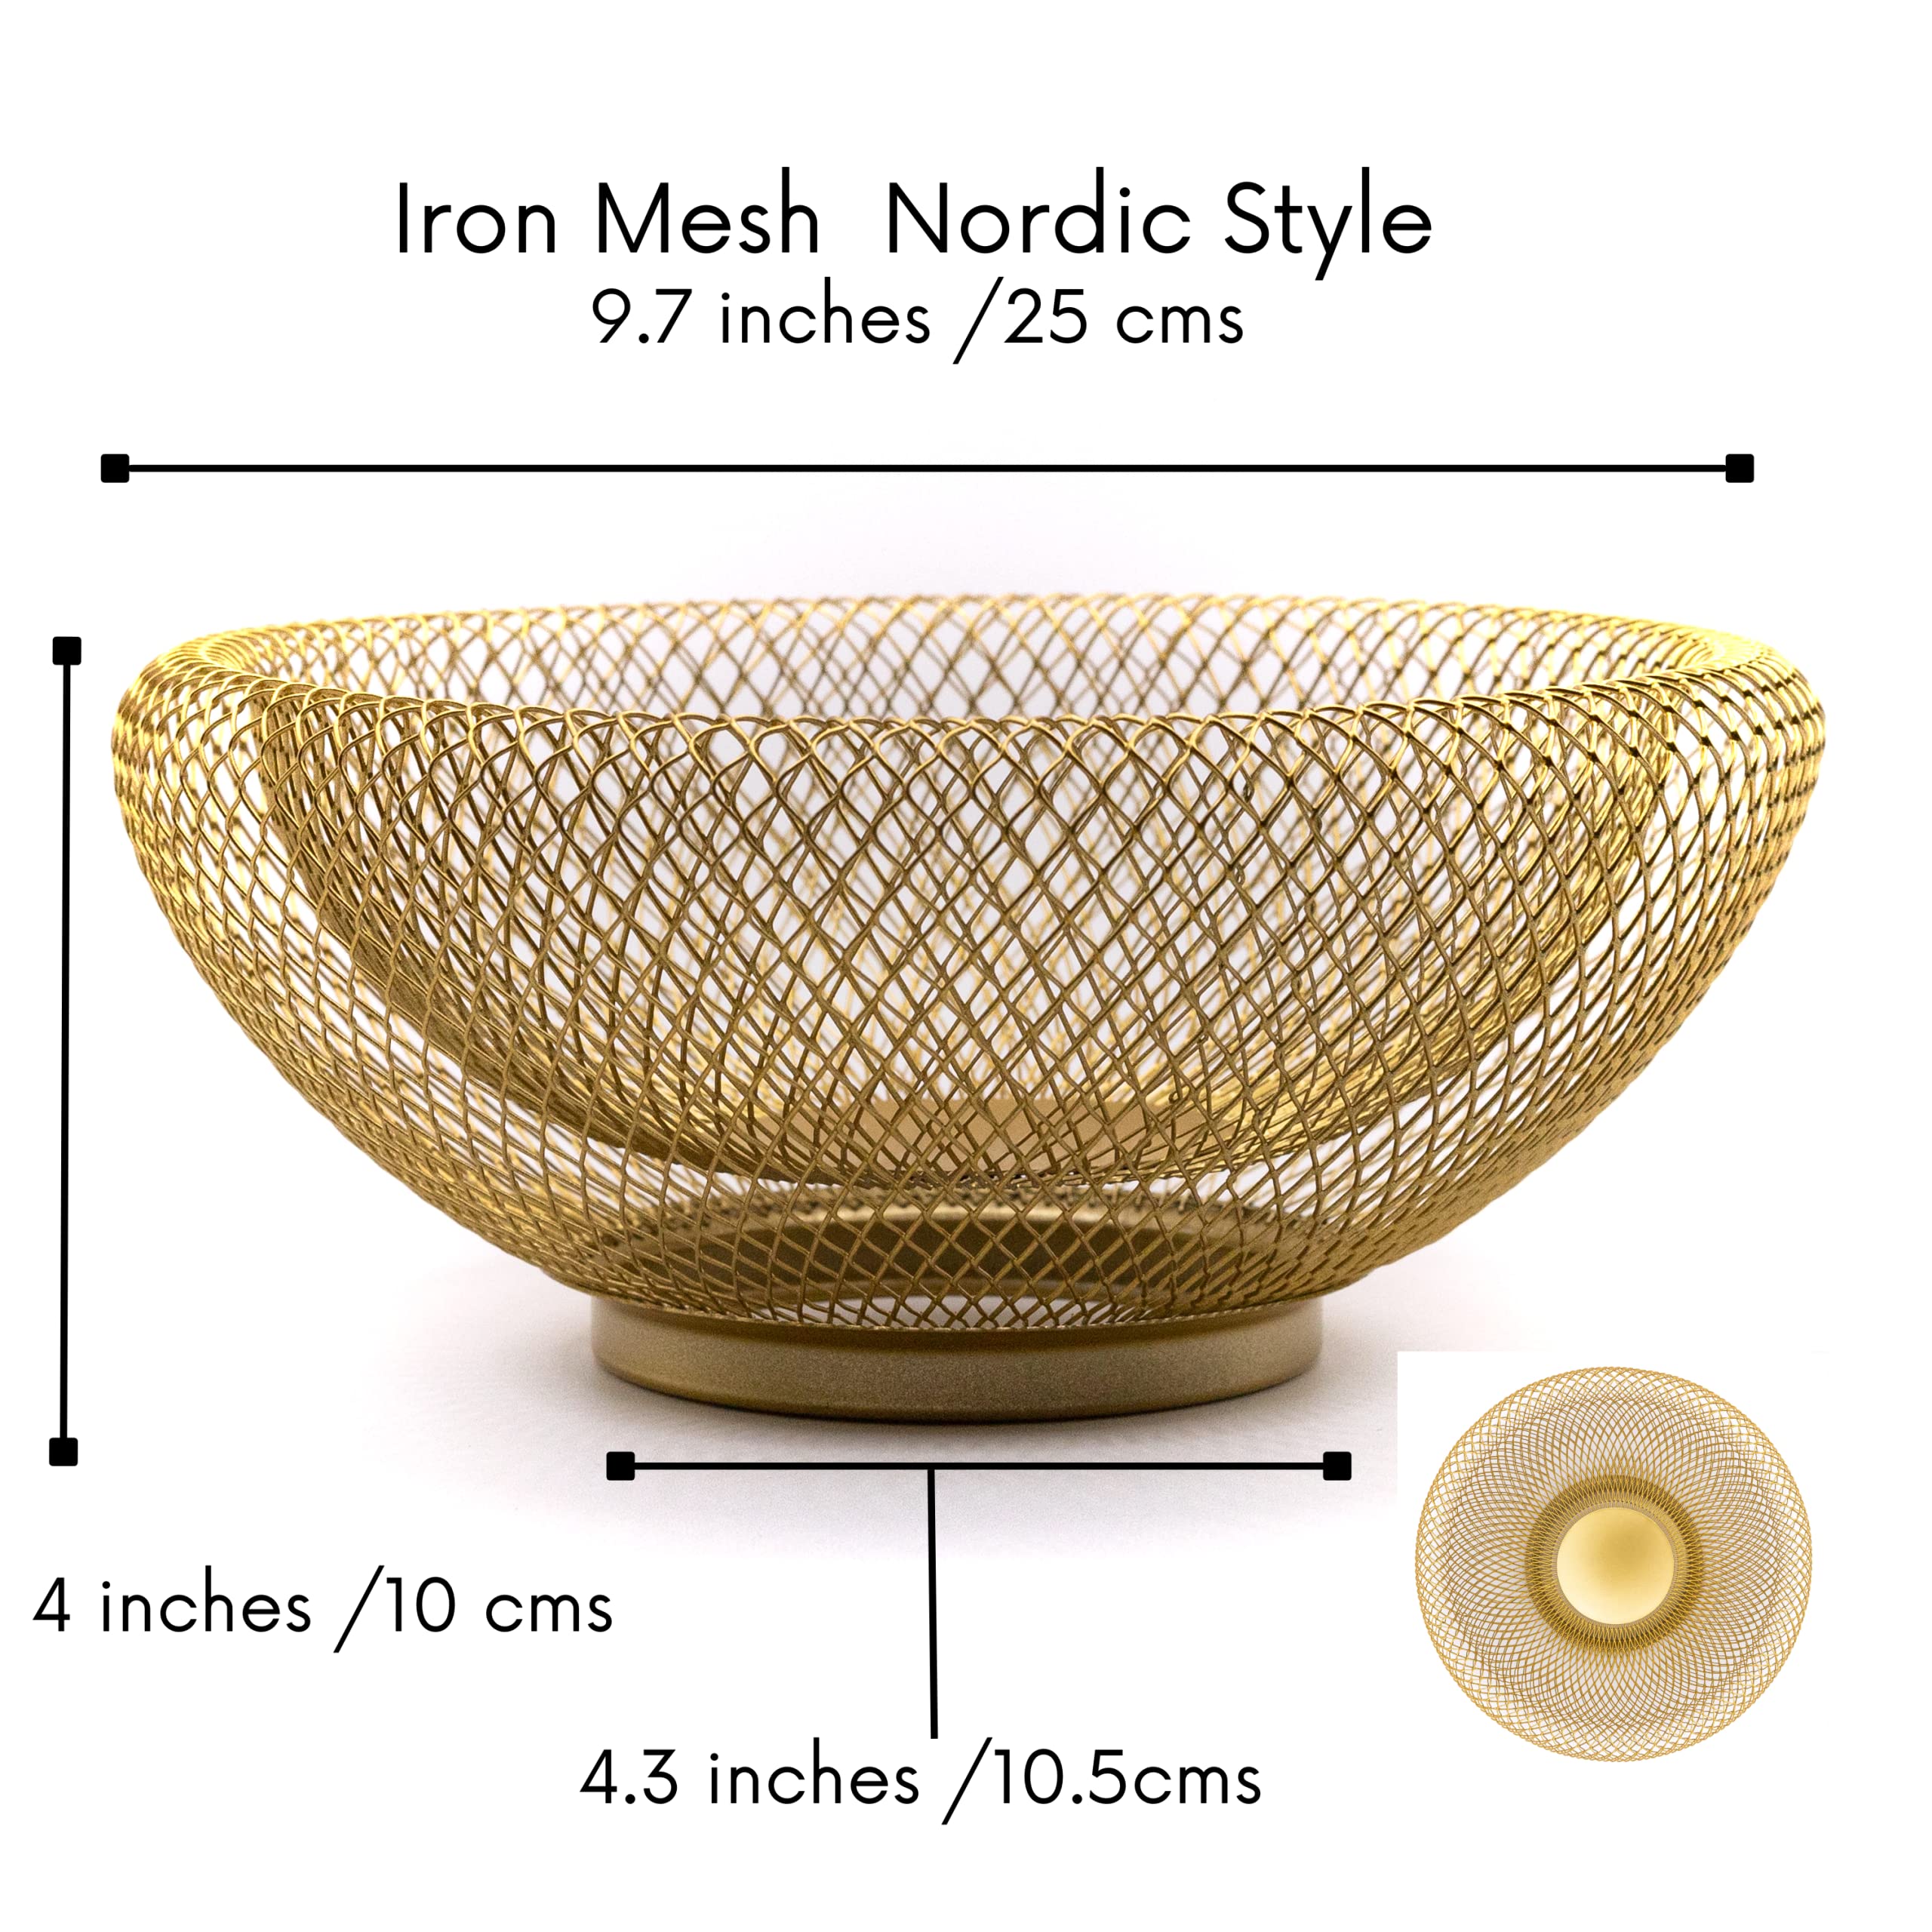 Metal Fruit Bowl Nordic Style Black or Gold Color , Made with Iron Mesh, Modern Centerpiece to Kitchen Decor and Dining Table, Medium